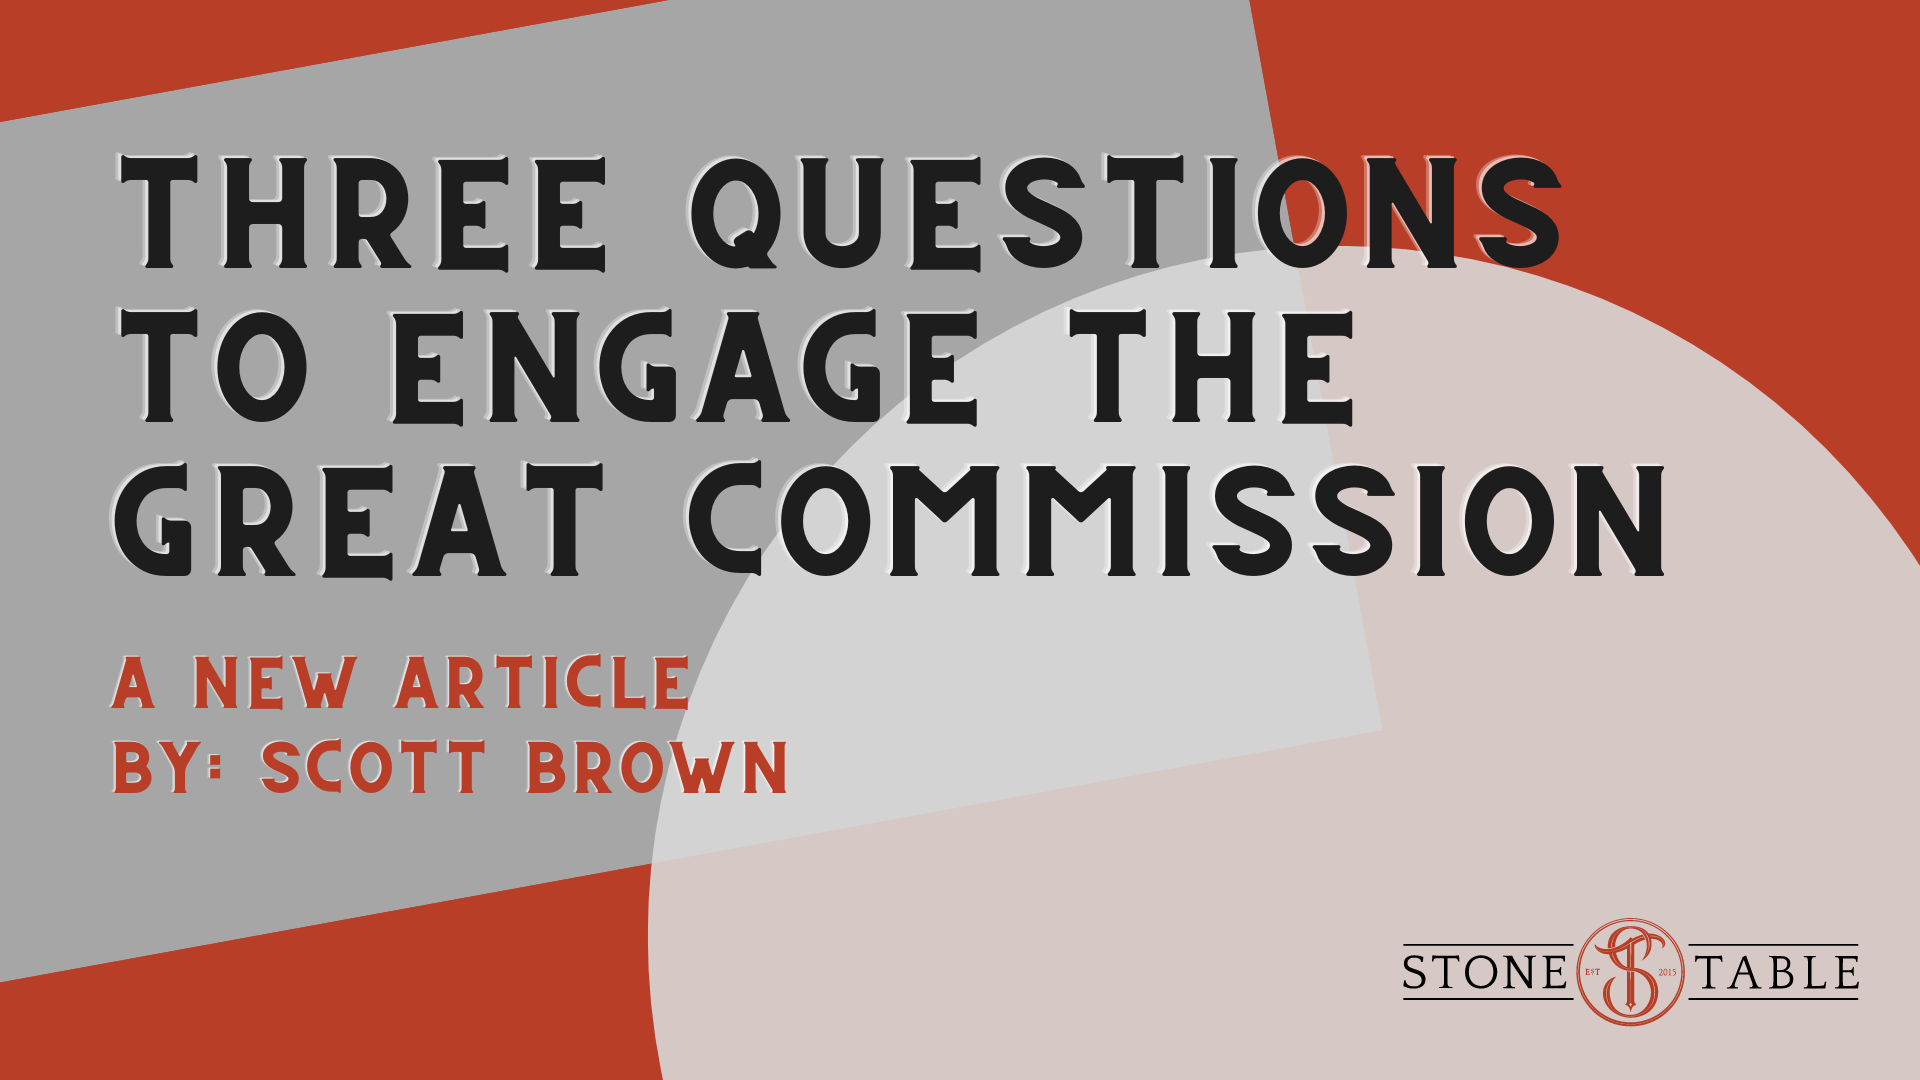 Three Questions to Engage the Great Commission